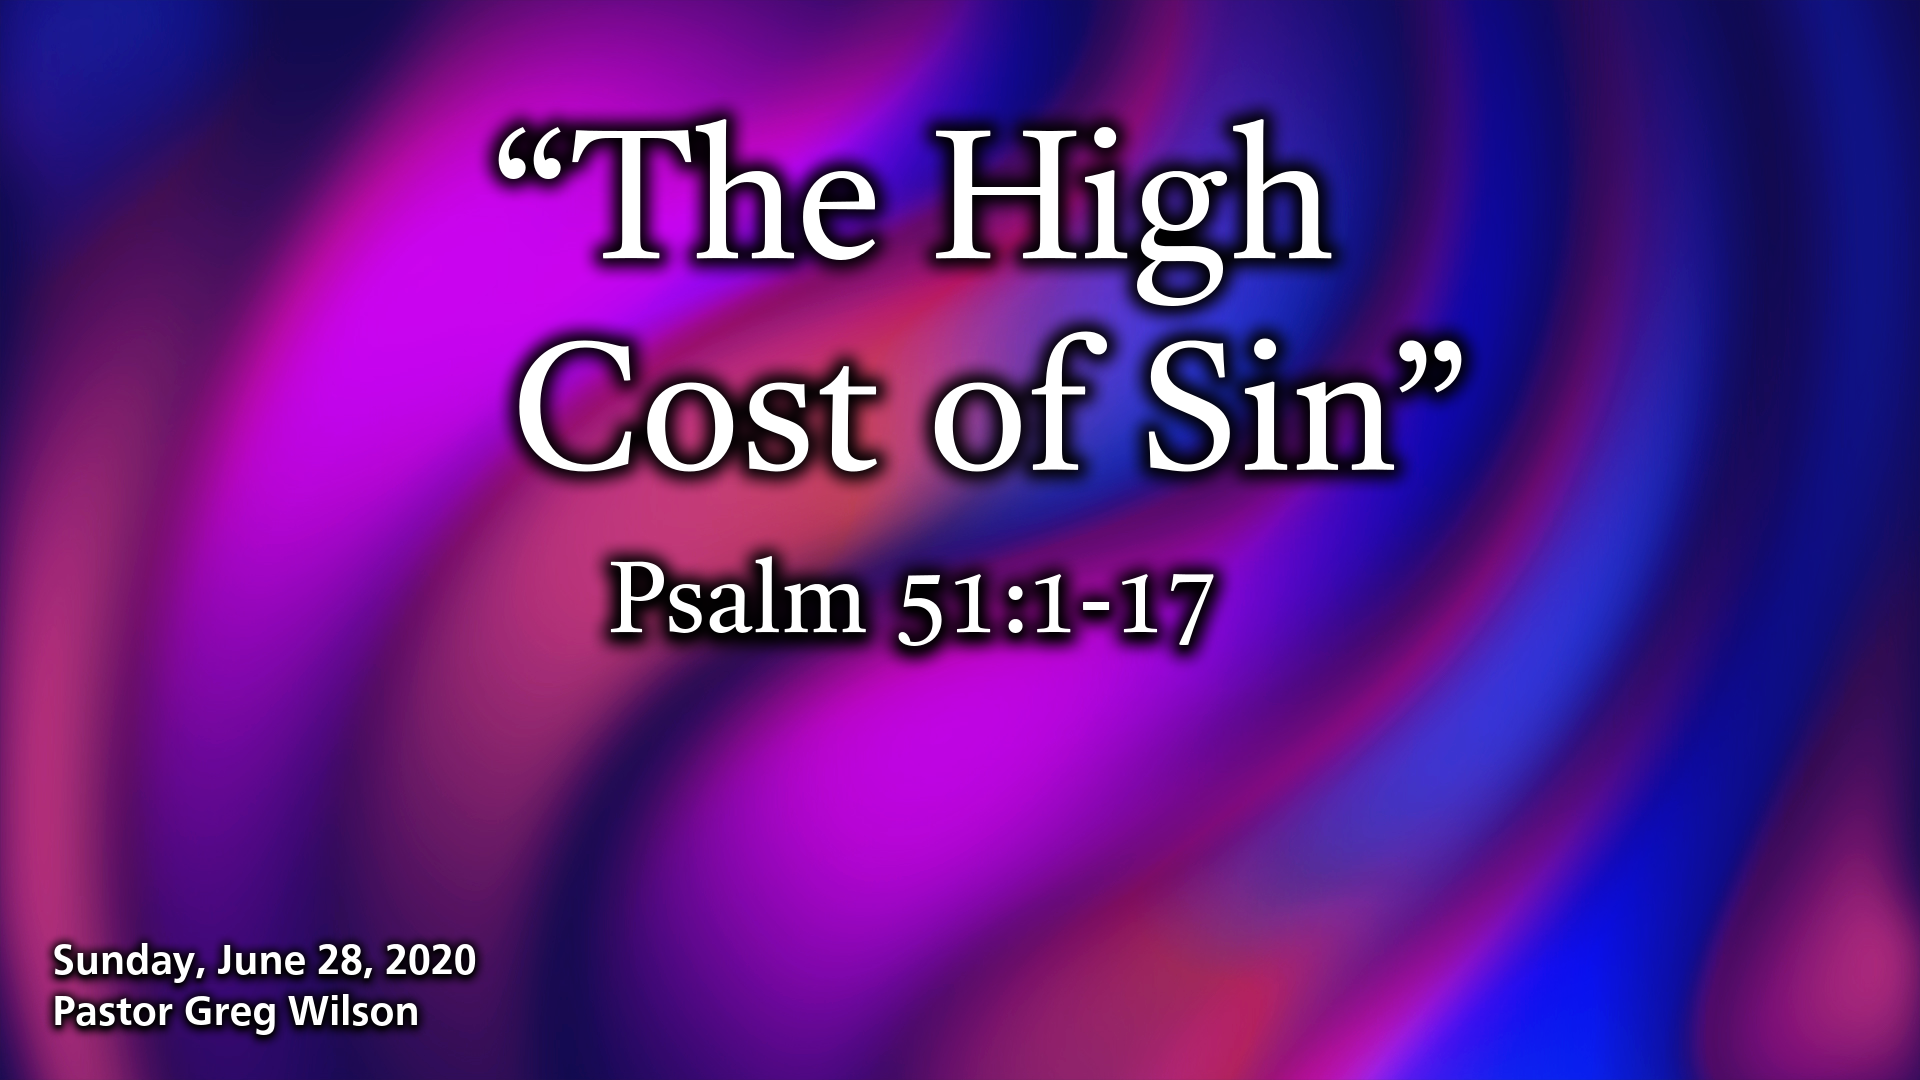 "The High Cost Of Sin"